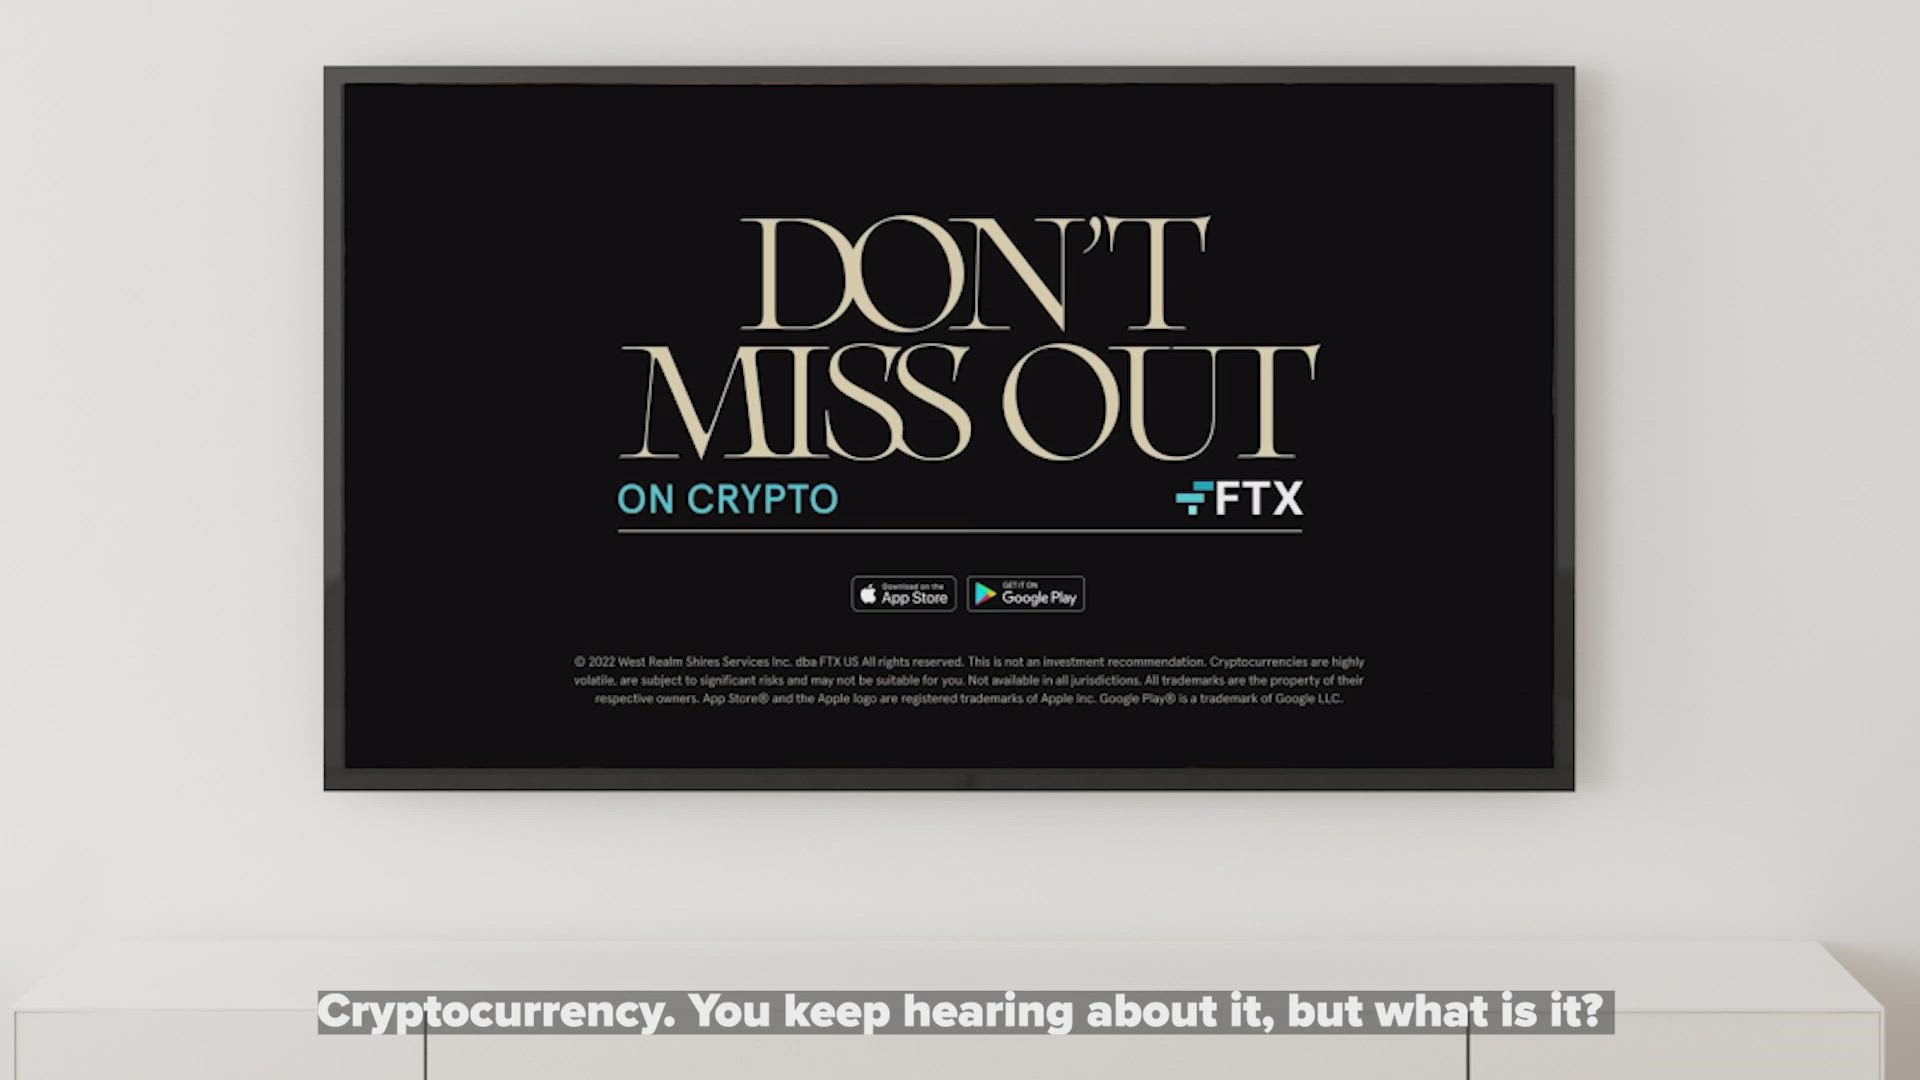 Super Bowl commercials, social media ads and all this talk about Bitcoin. If it wasn't obvious before, cryptocurrency has officially hit the mainstream.